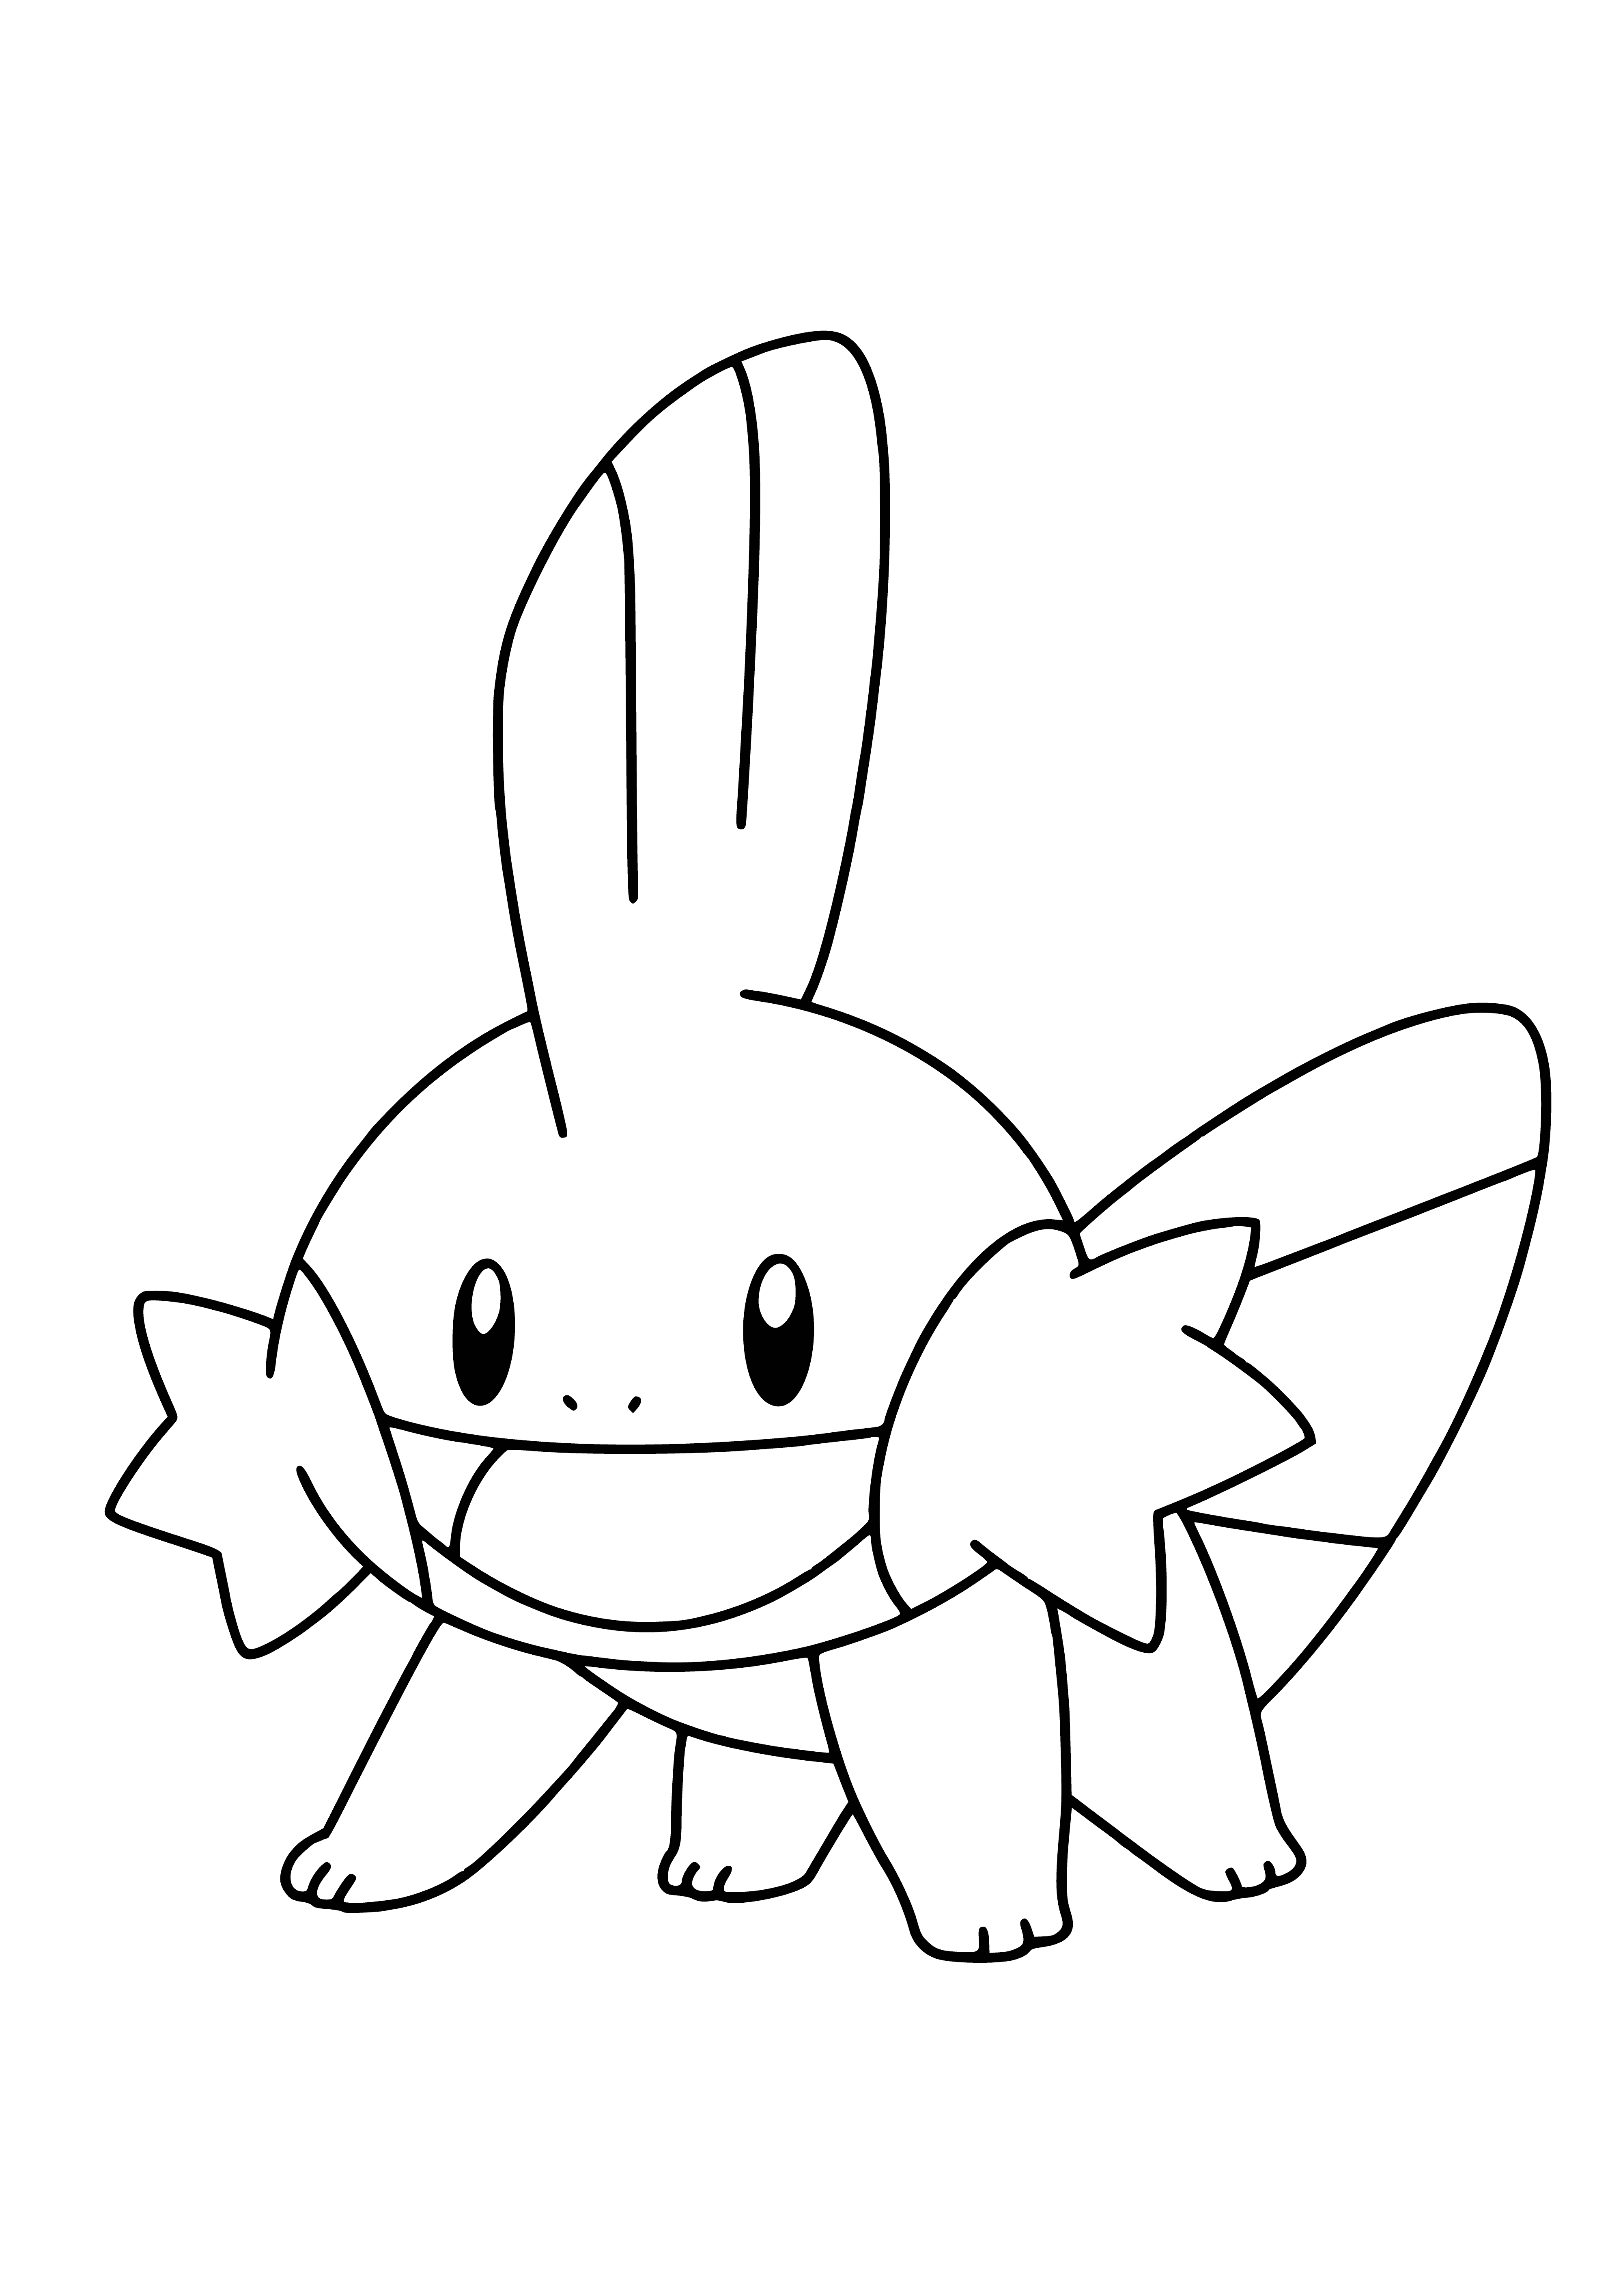 coloring page: Coloring page of blue, amphibious Madkip, with a large tail fin, four small legs and webbed toes, black eyes and a large toothless mouth. #Pokemon #Madkip